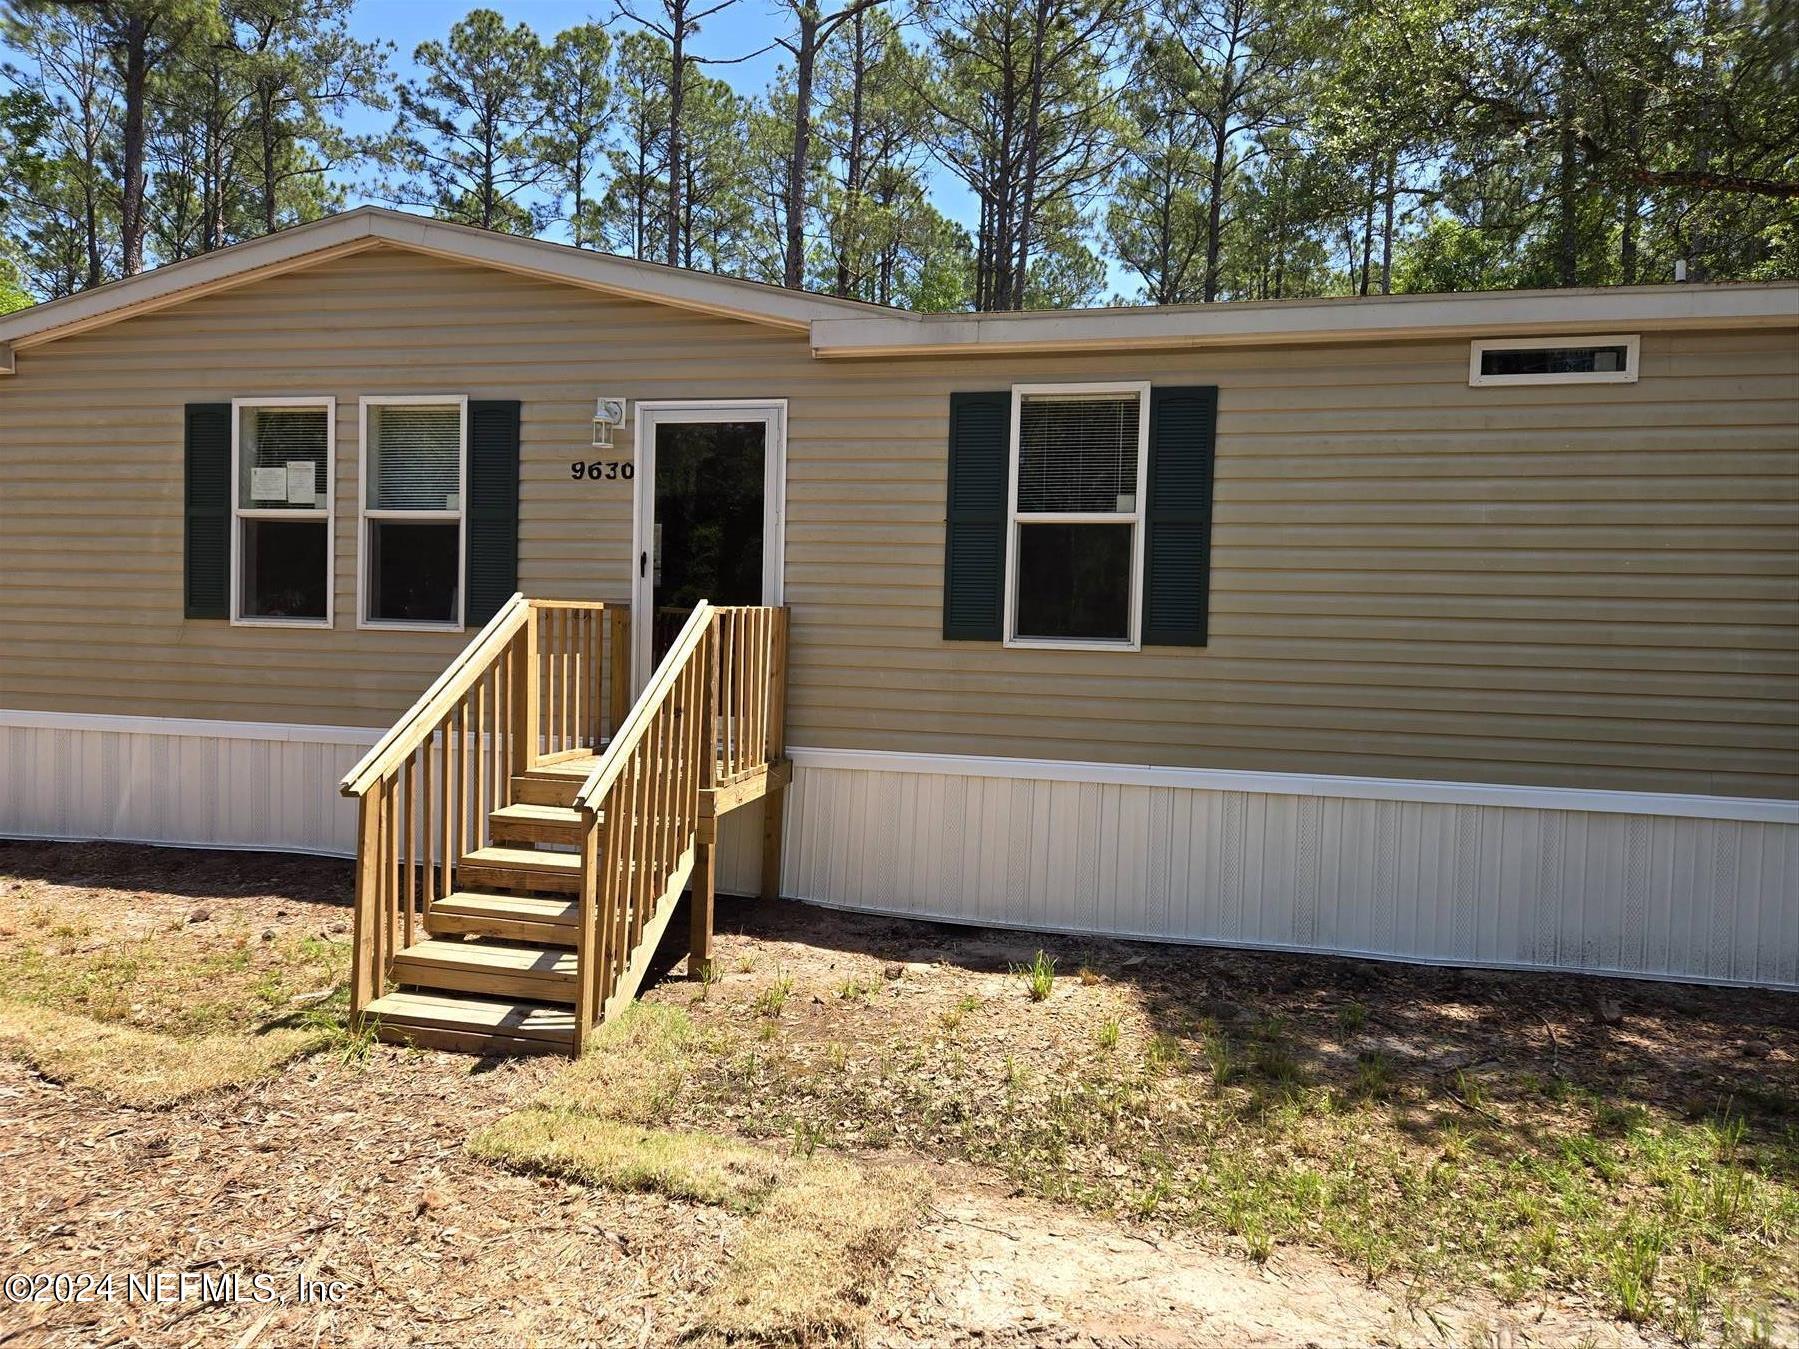 Hastings, FL home for sale located at 9630 McMahon Avenue, Hastings, FL 32145